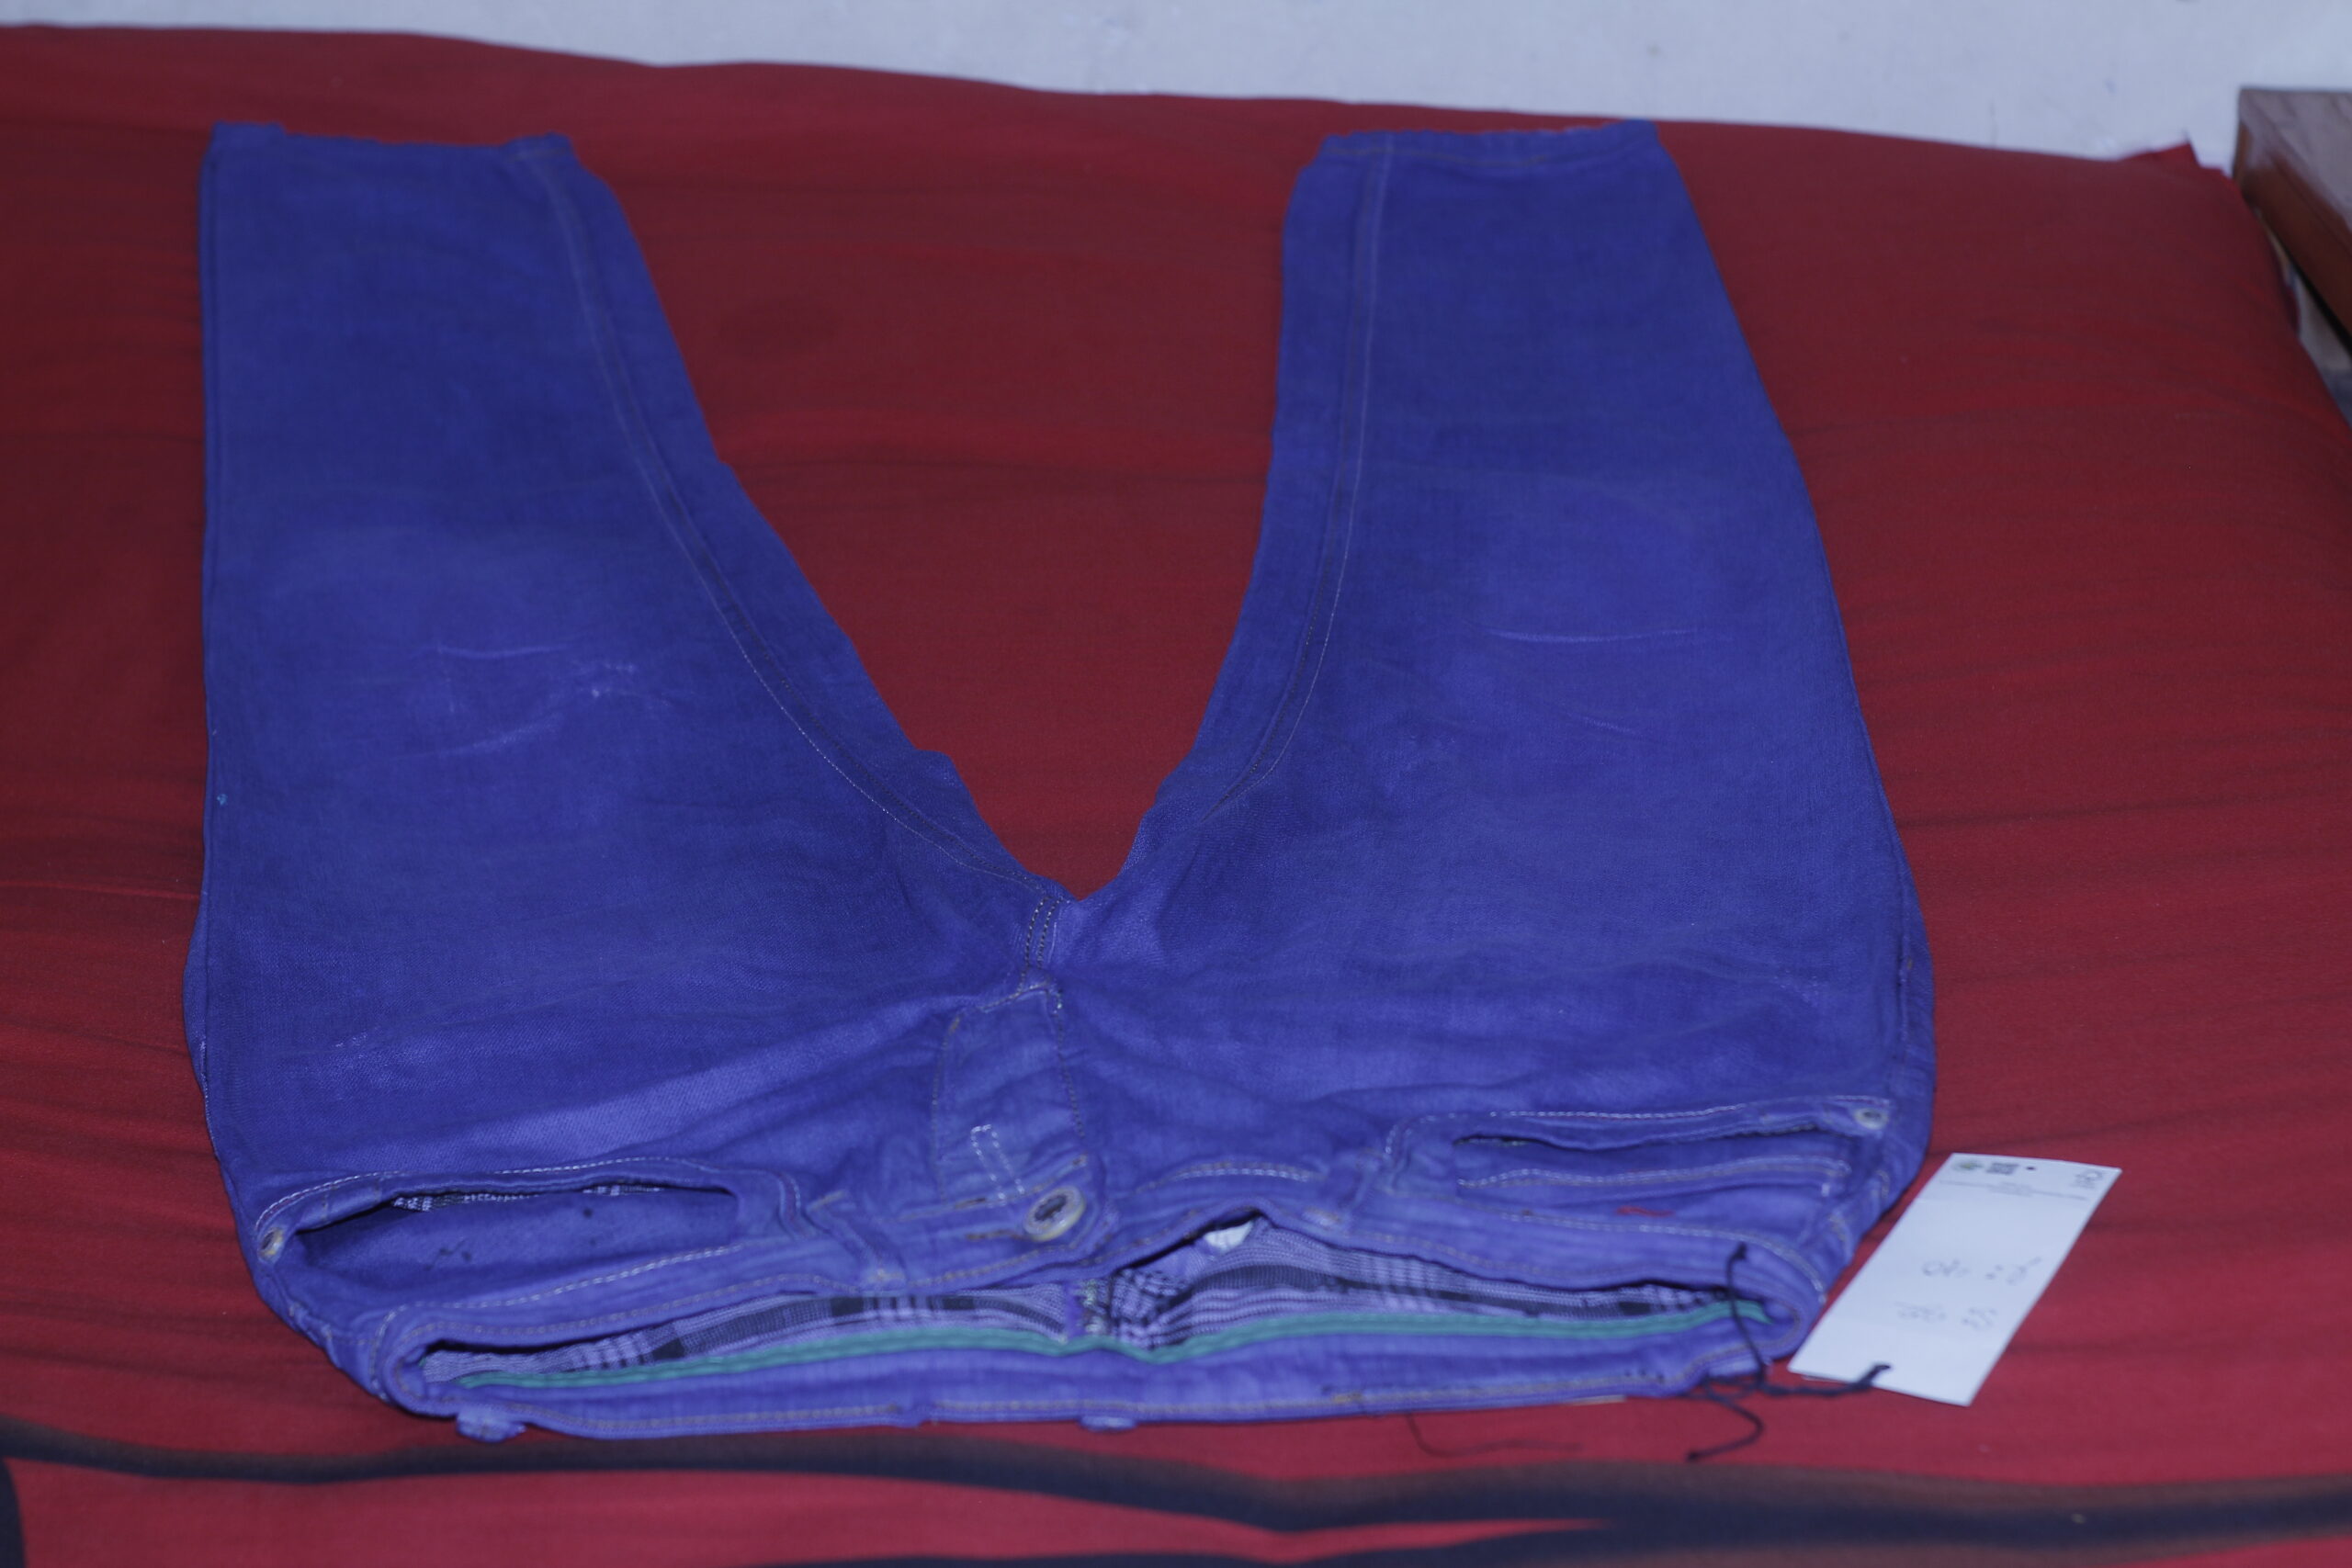 Jeans Pant For Man Size: 32